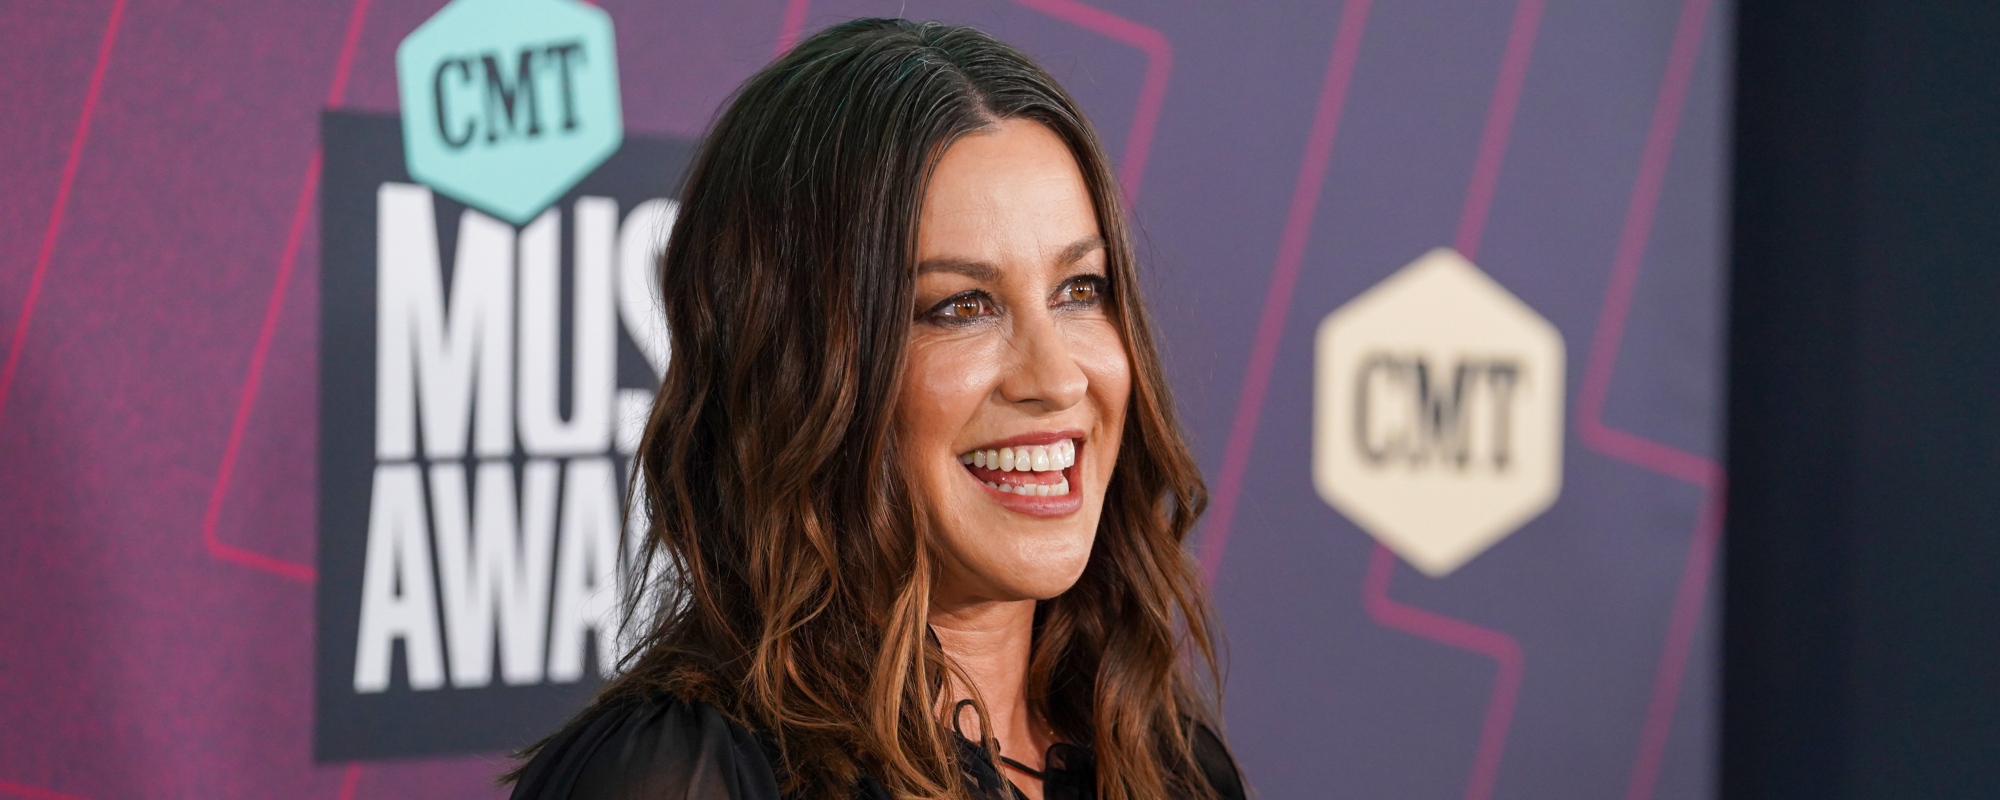 Watch: Alanis Morissette Stays Faithful to Wham! with Performance of “Last Christmas” on ‘Tonight Show’